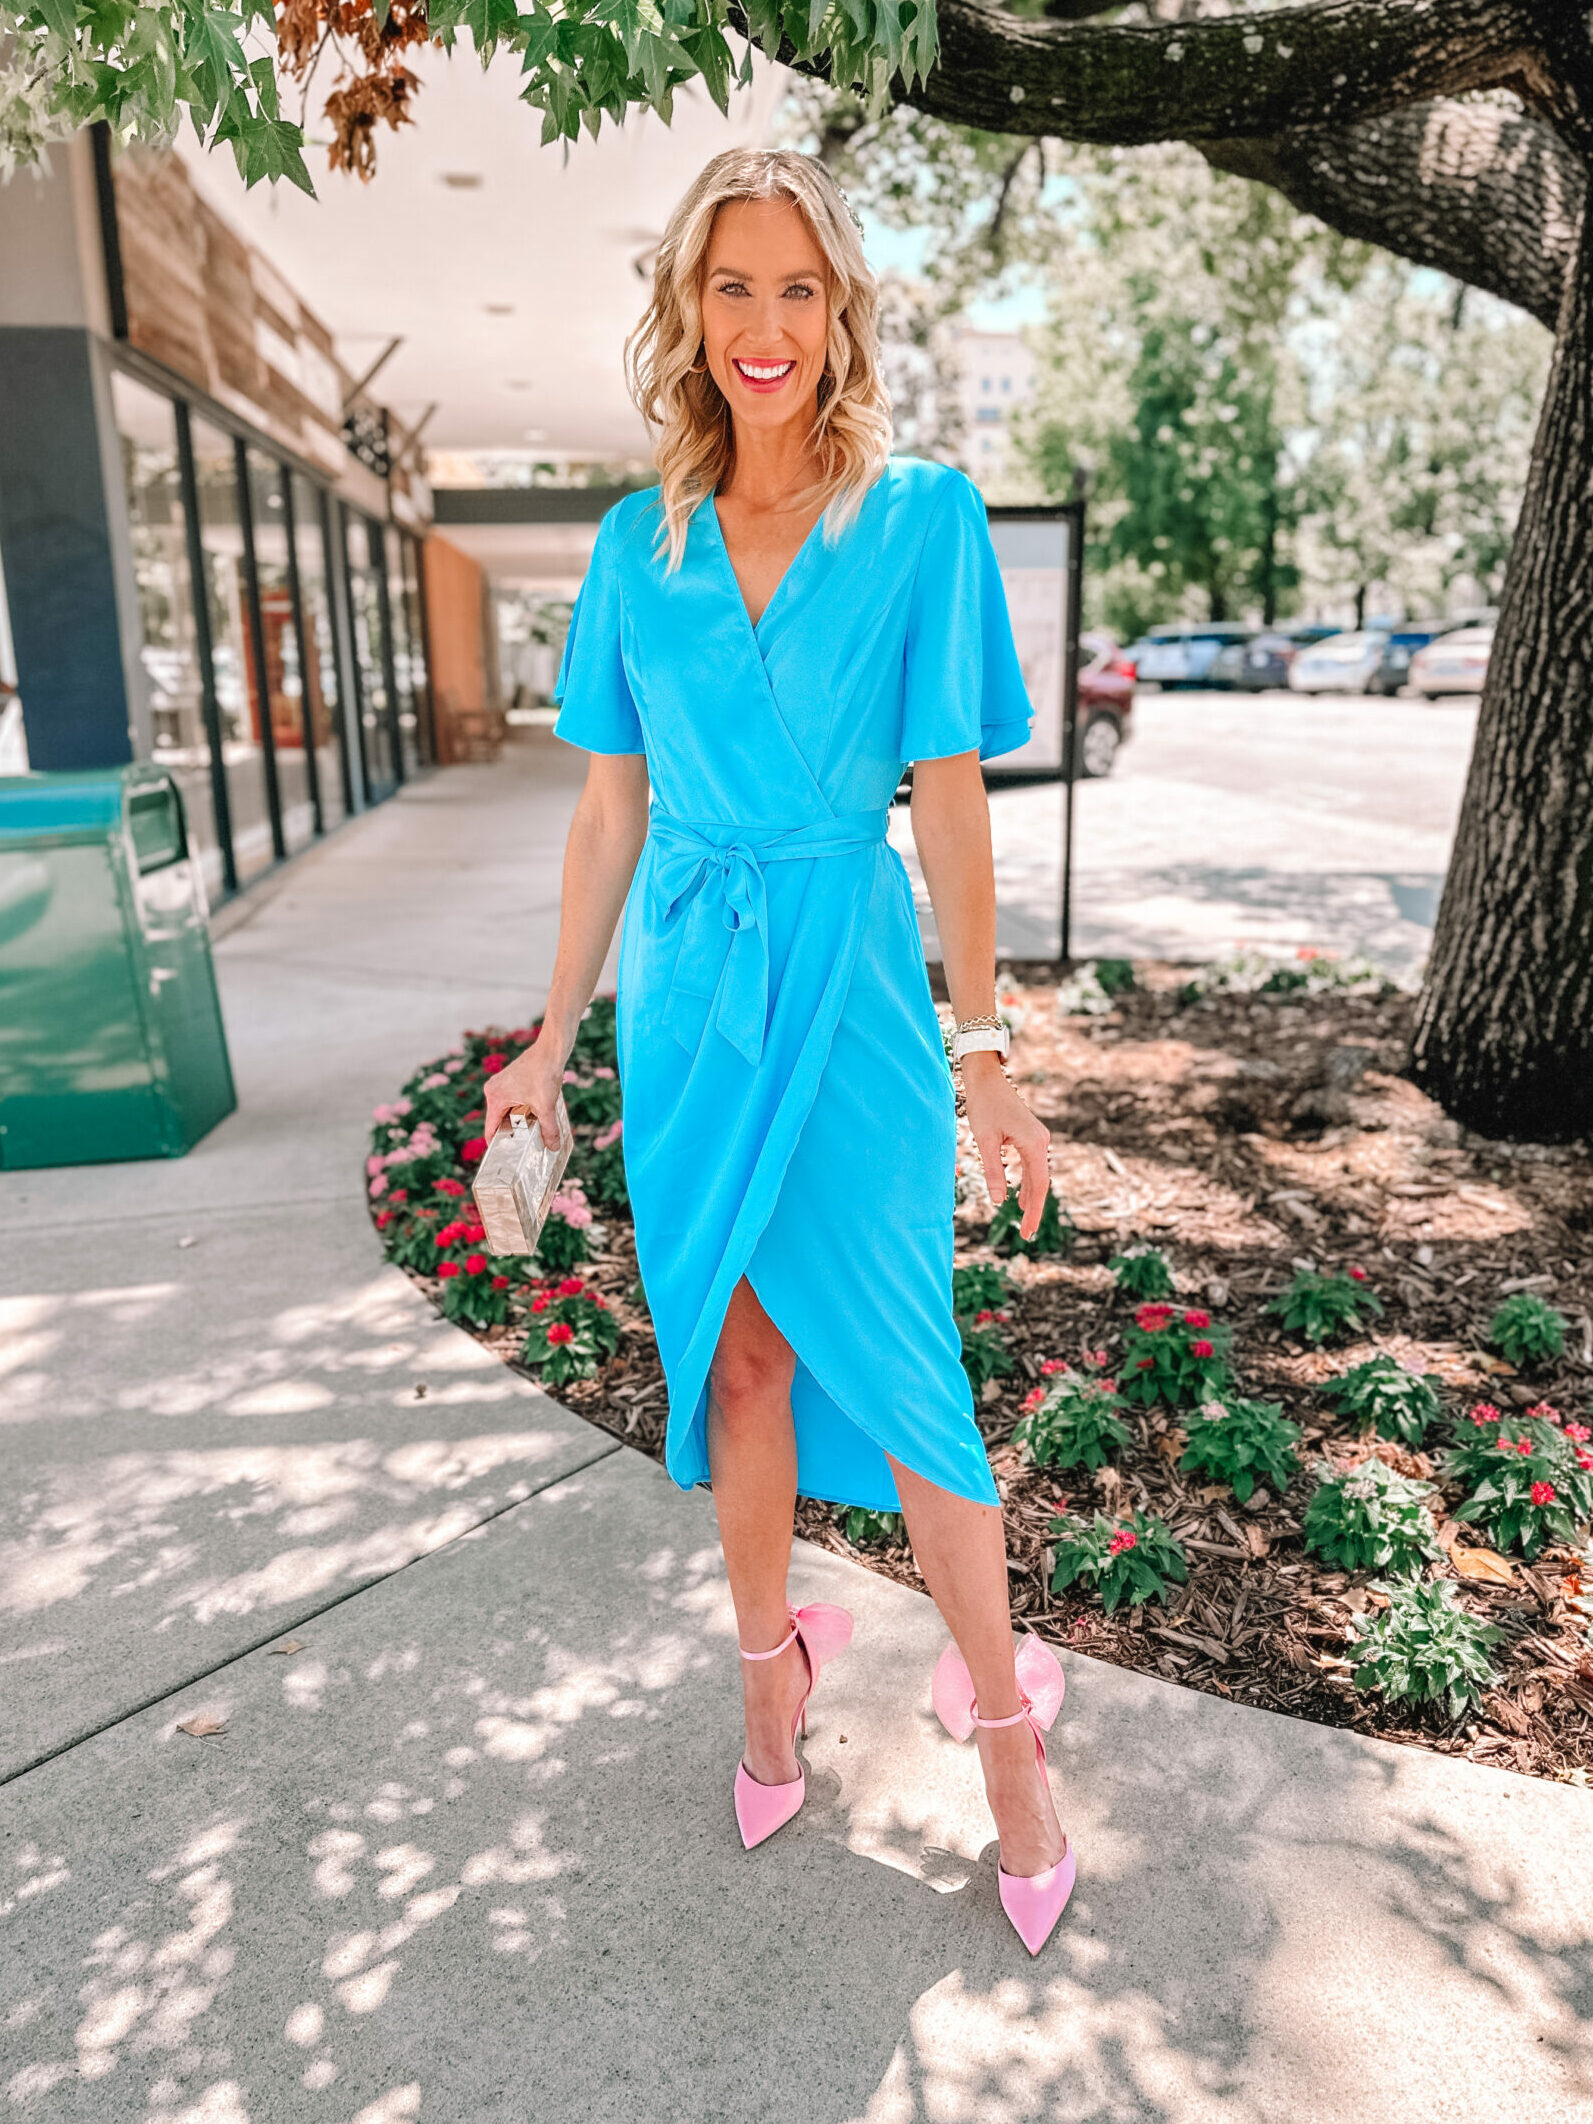 Today I am sharing several pairs of formal Dream Pairs shoes and dresses to go with them for any formal event you might have this fall or winter. Use code "amyann" for 20% off their website making them only $35-$45 too! You'll love these pink bow heels and this blue formal dress!